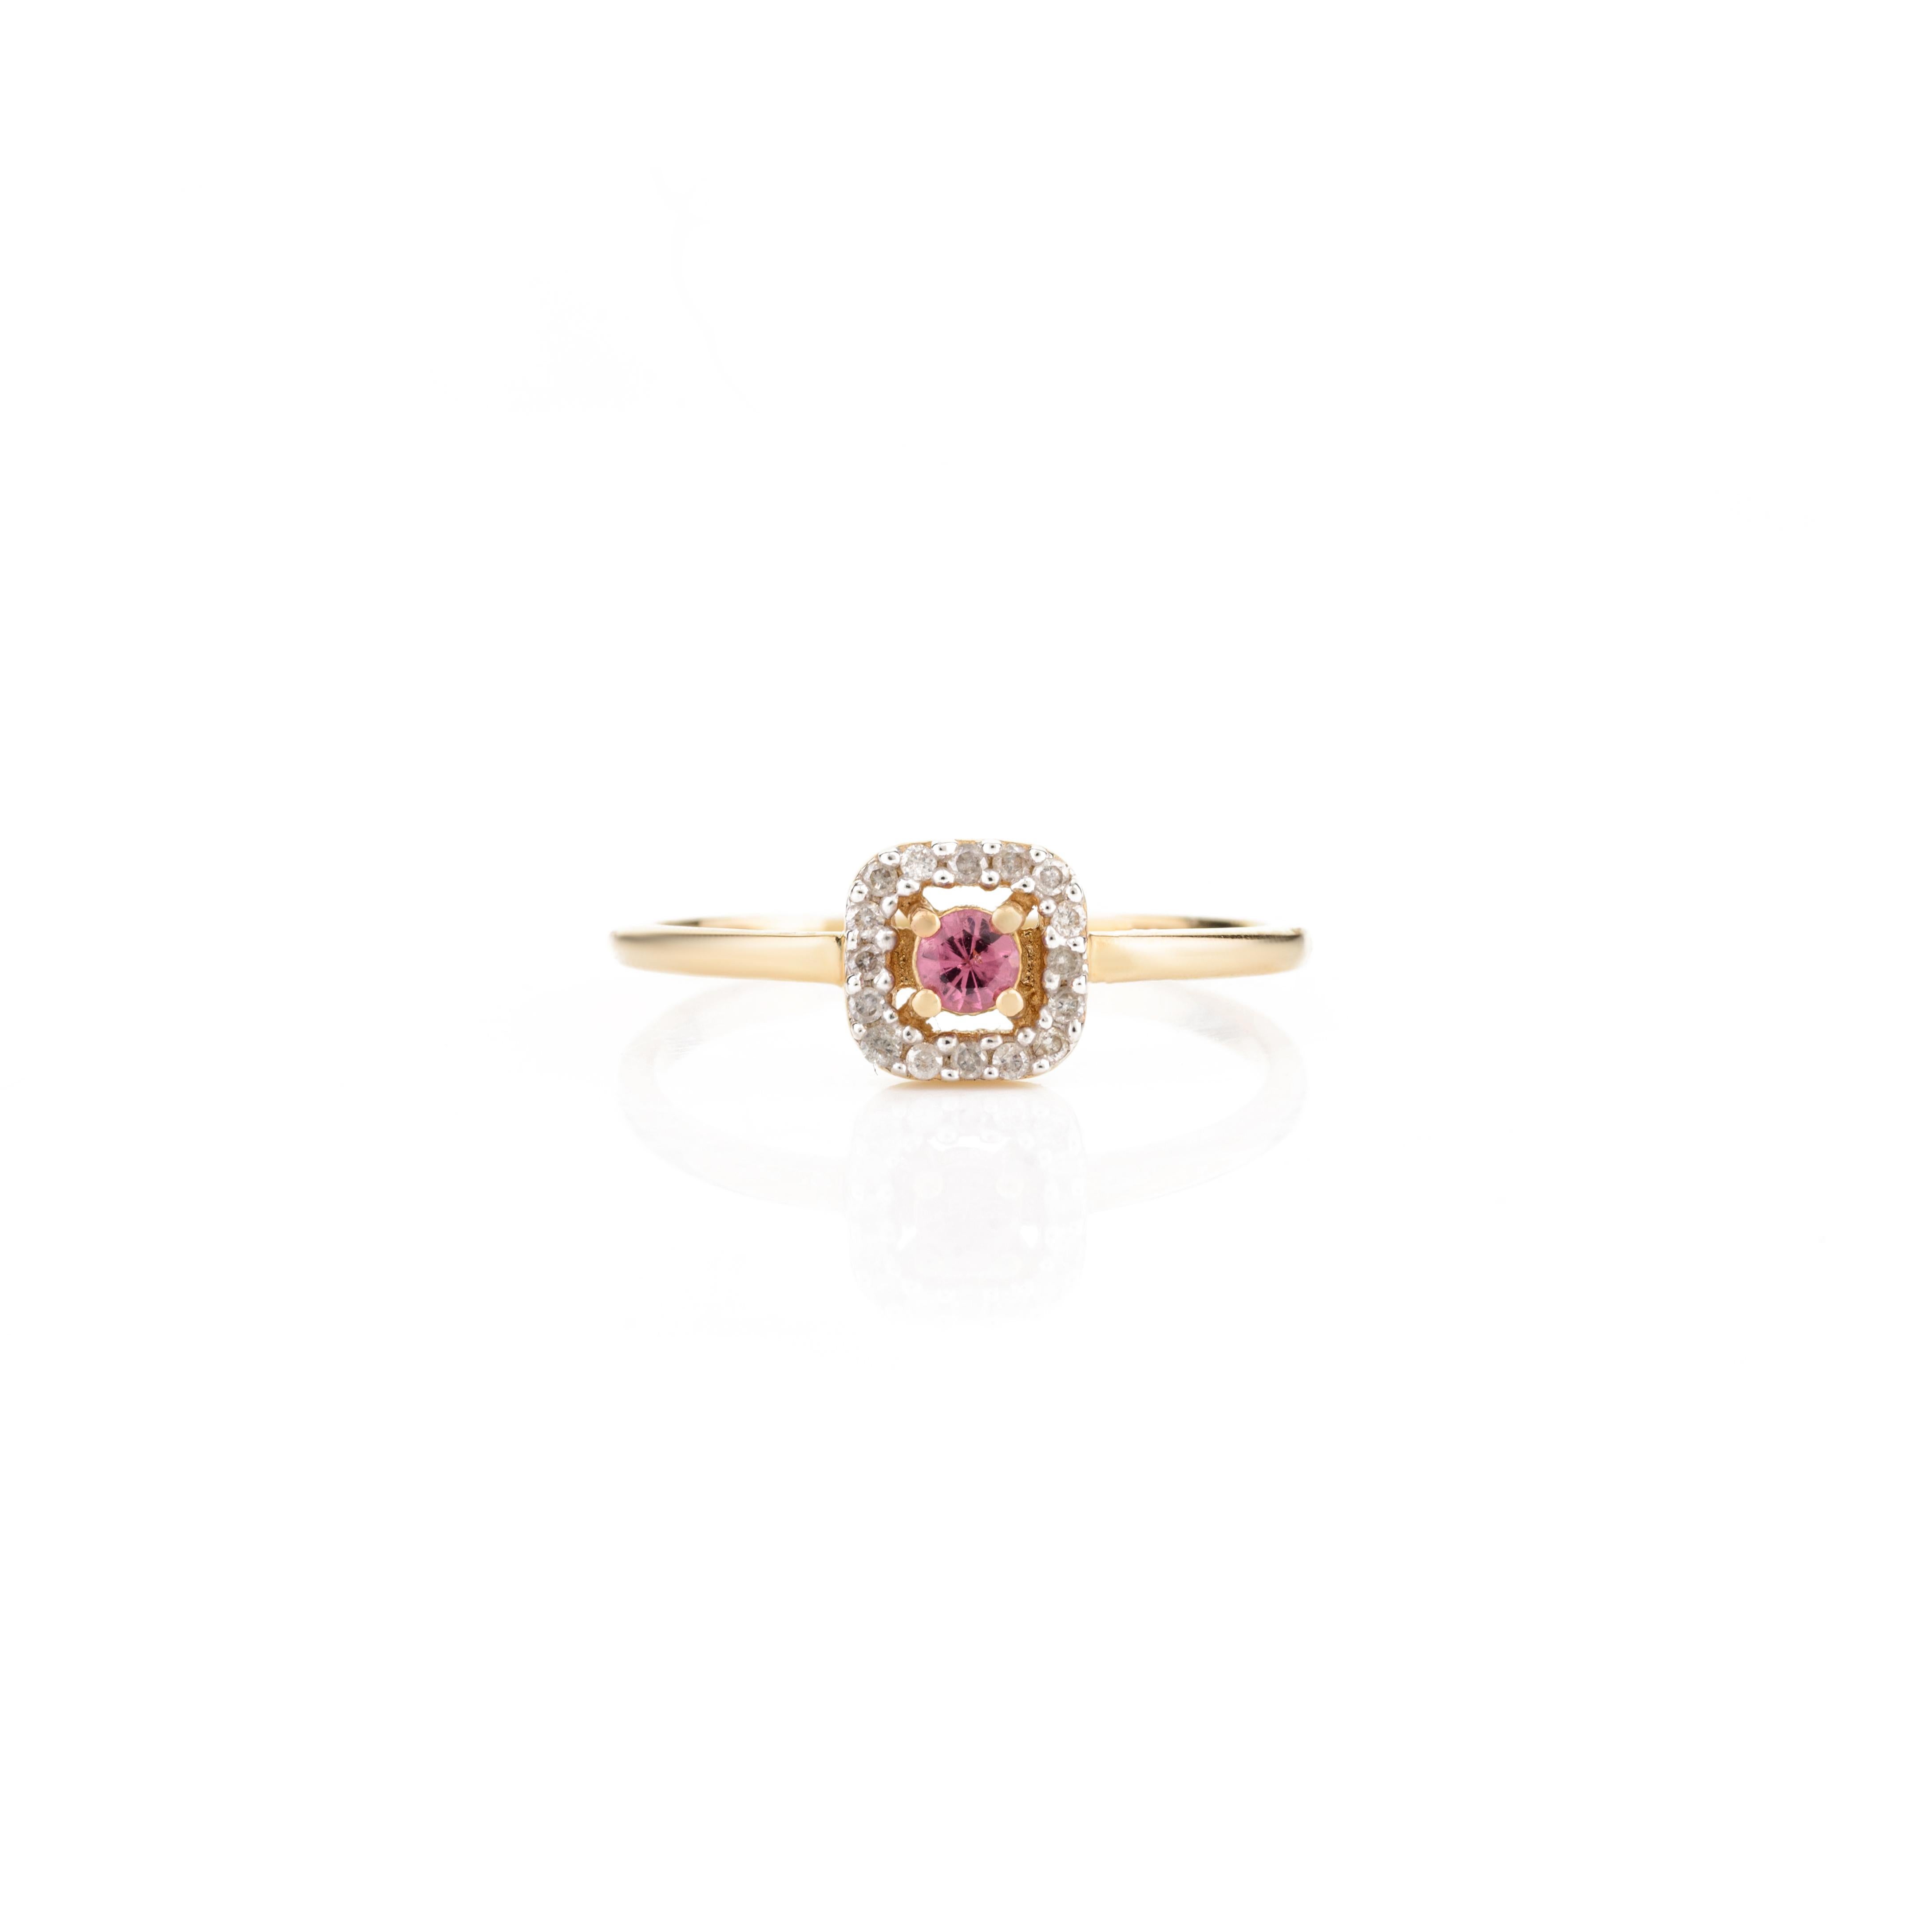 For Sale:  Dainty Pink Sapphire and Halo Diamond Ring Made in 14k Solid Yellow Gold 2